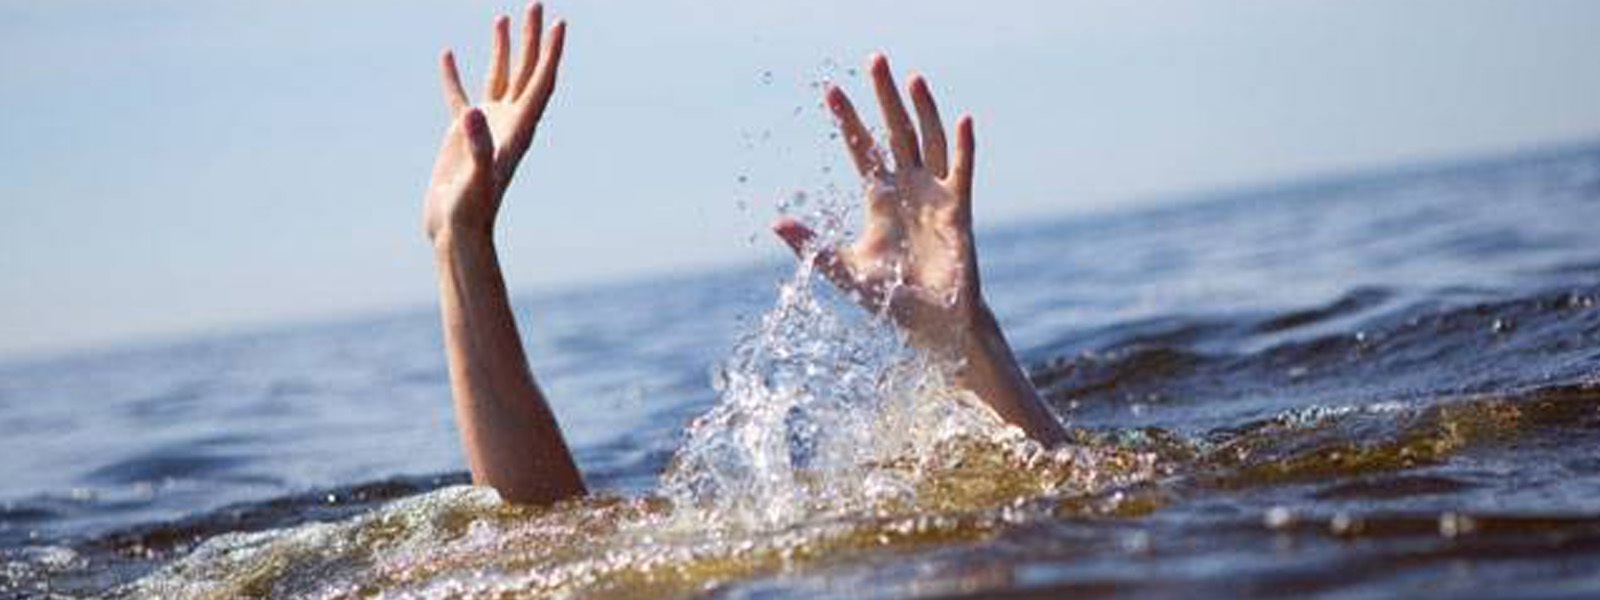 Youth dies due to drowning in Balangoda